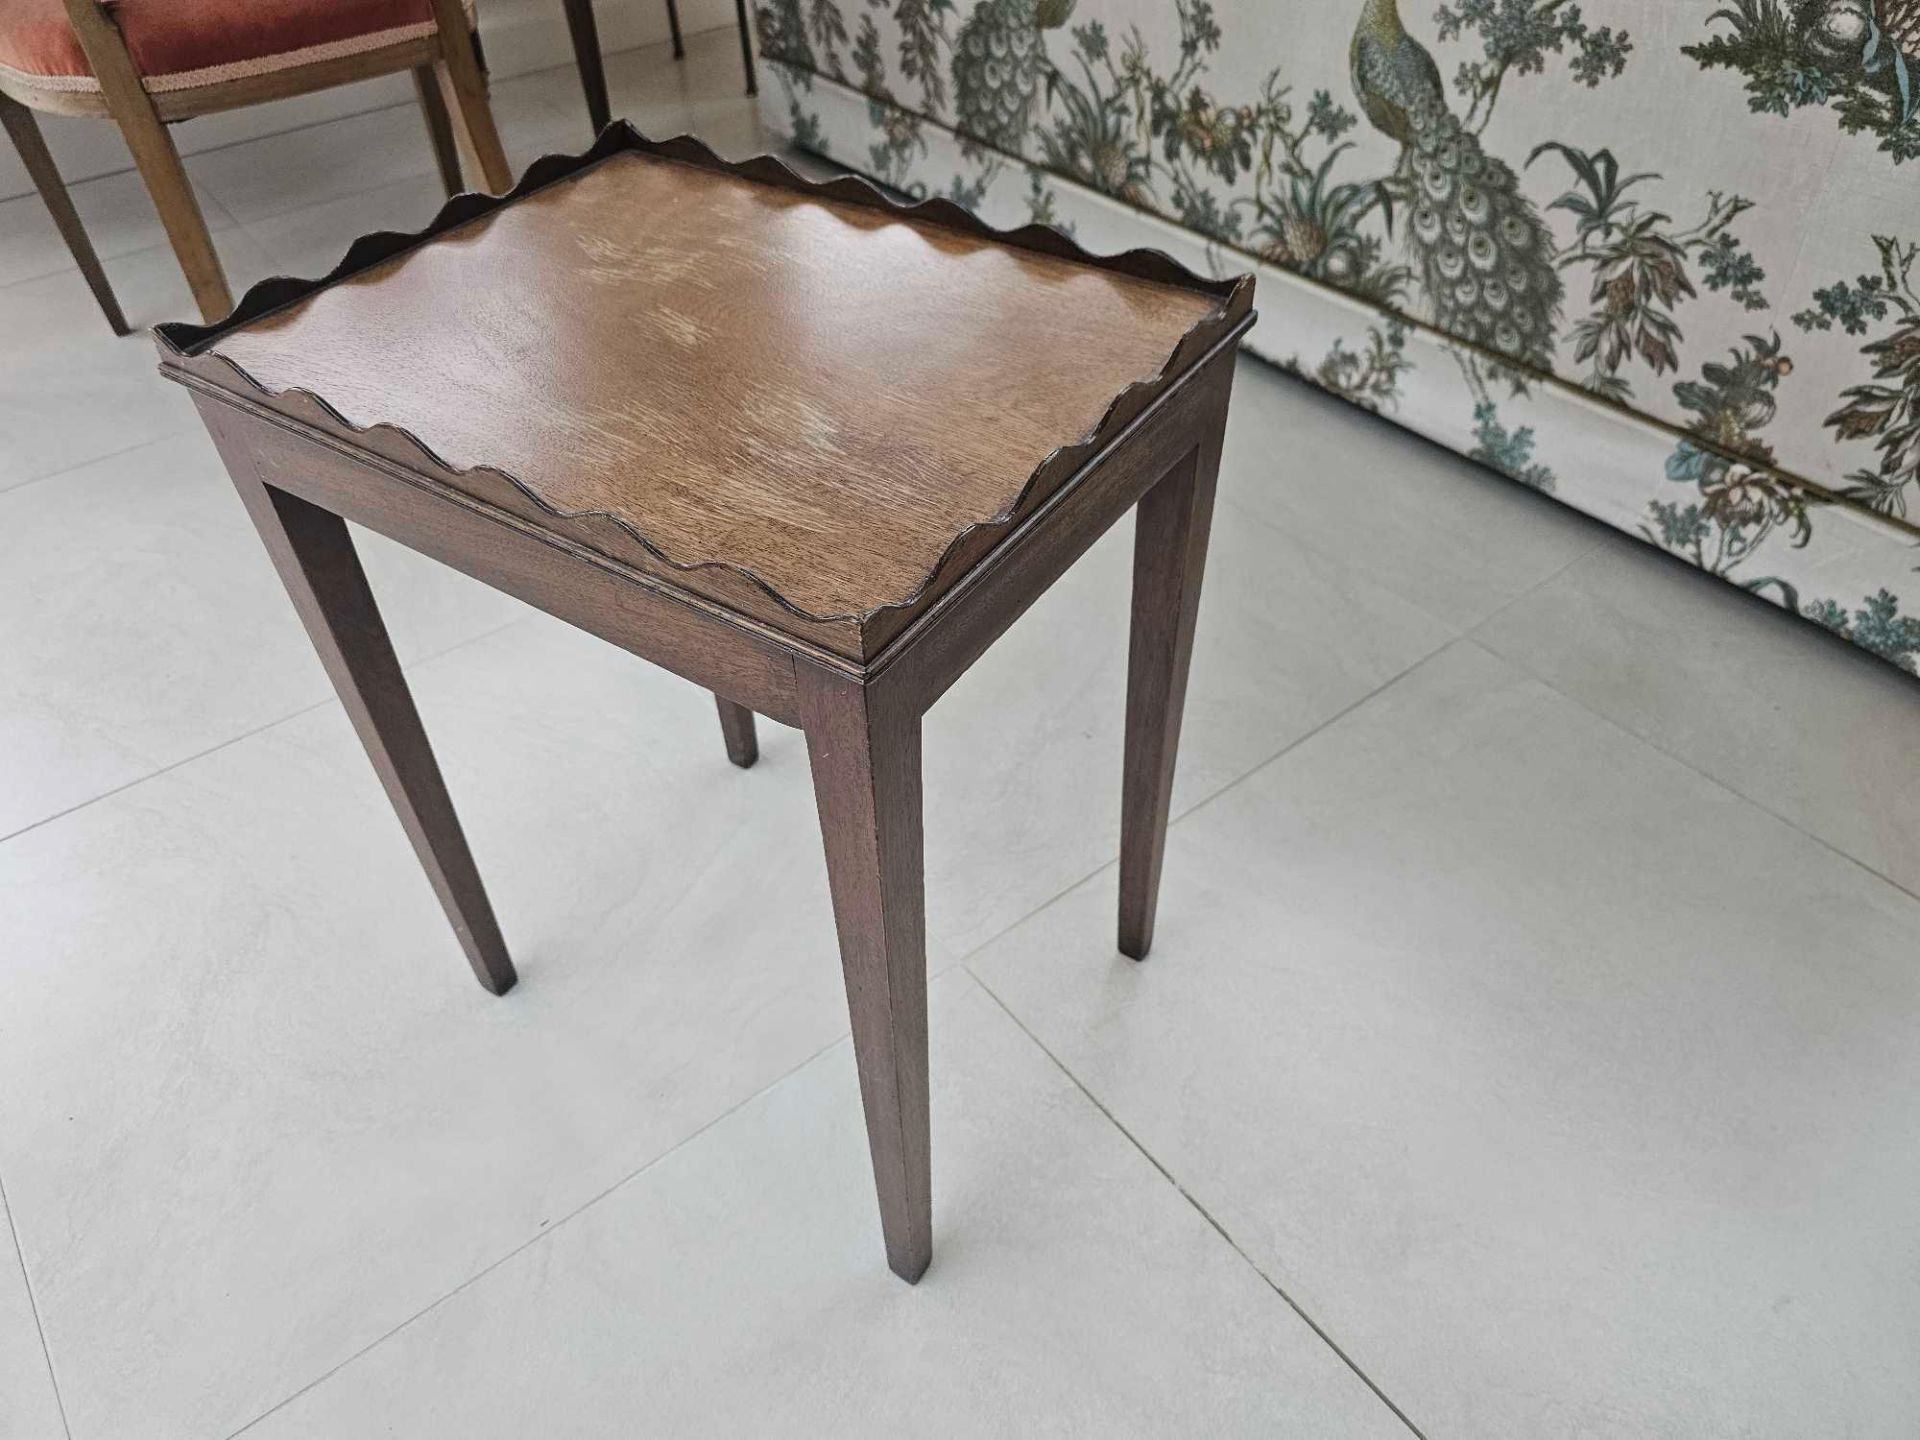 A Scalloped Edge Side Table Raised On Square Tapering Legs 42 X 32 X 52cm - Image 4 of 5